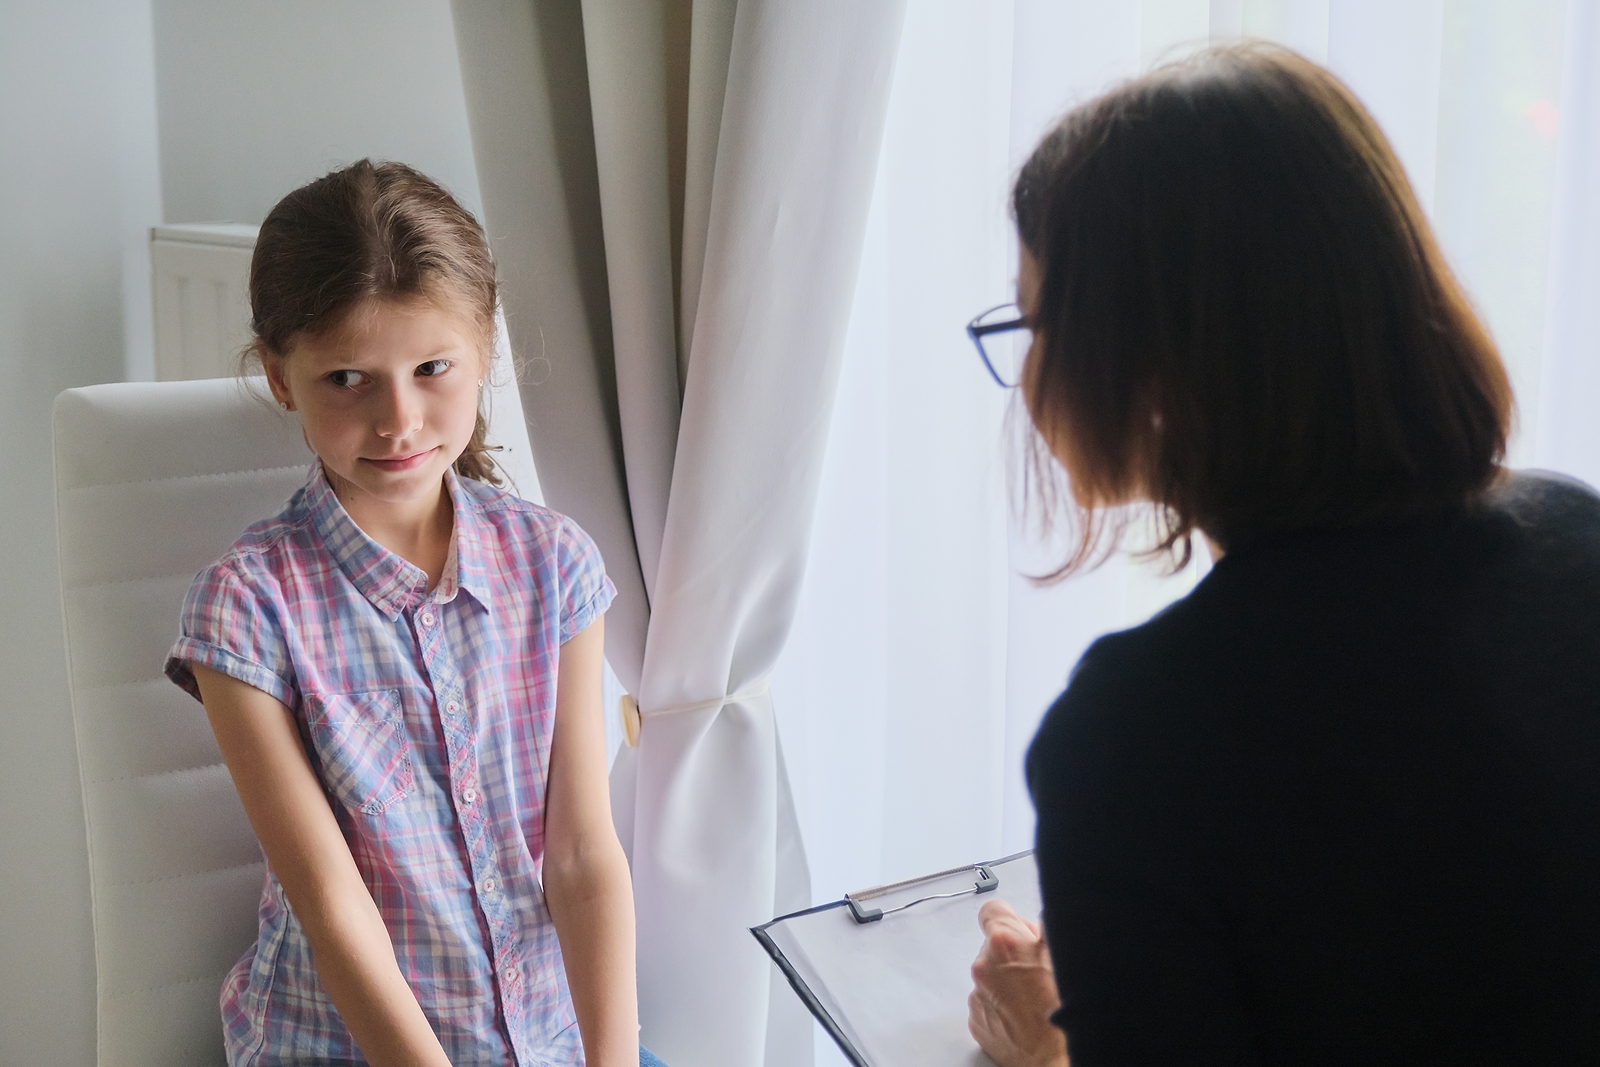 Psychotherapy west london - Meeting child girl with school counselor therapist